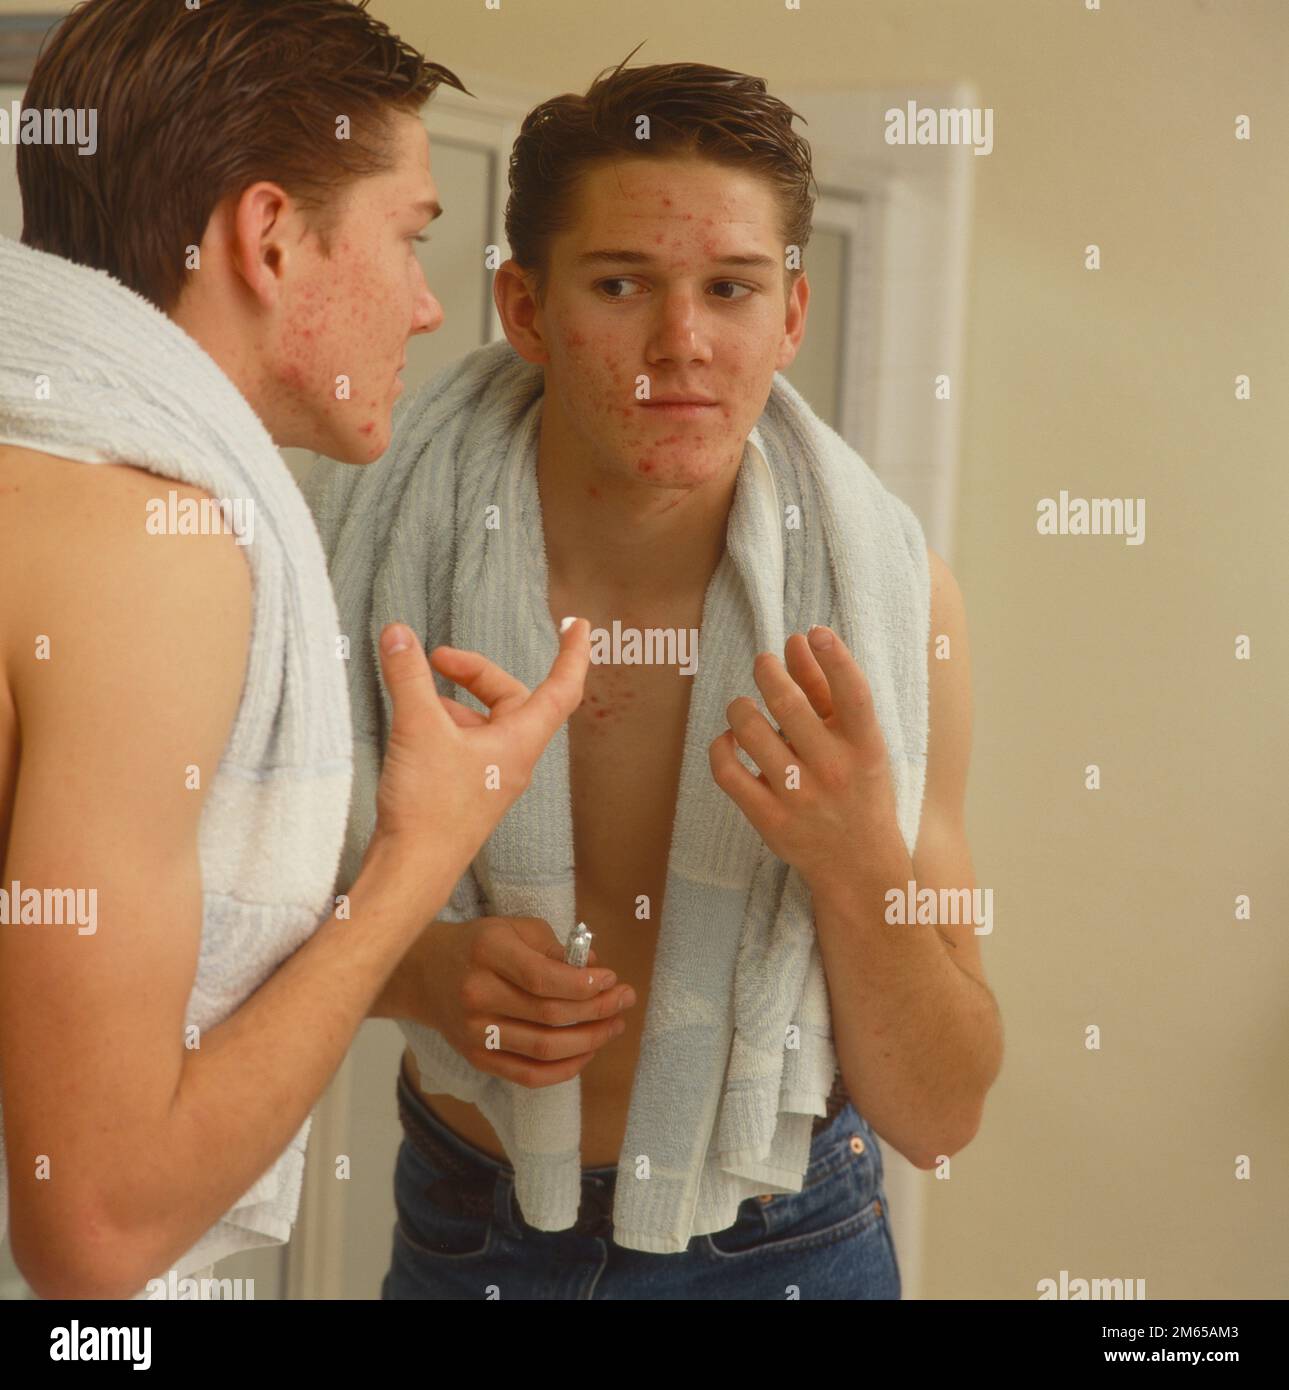 Teenage boy with bad acne problem standing in front of a mirror getting ready to apply medicine to his face Stock Photo